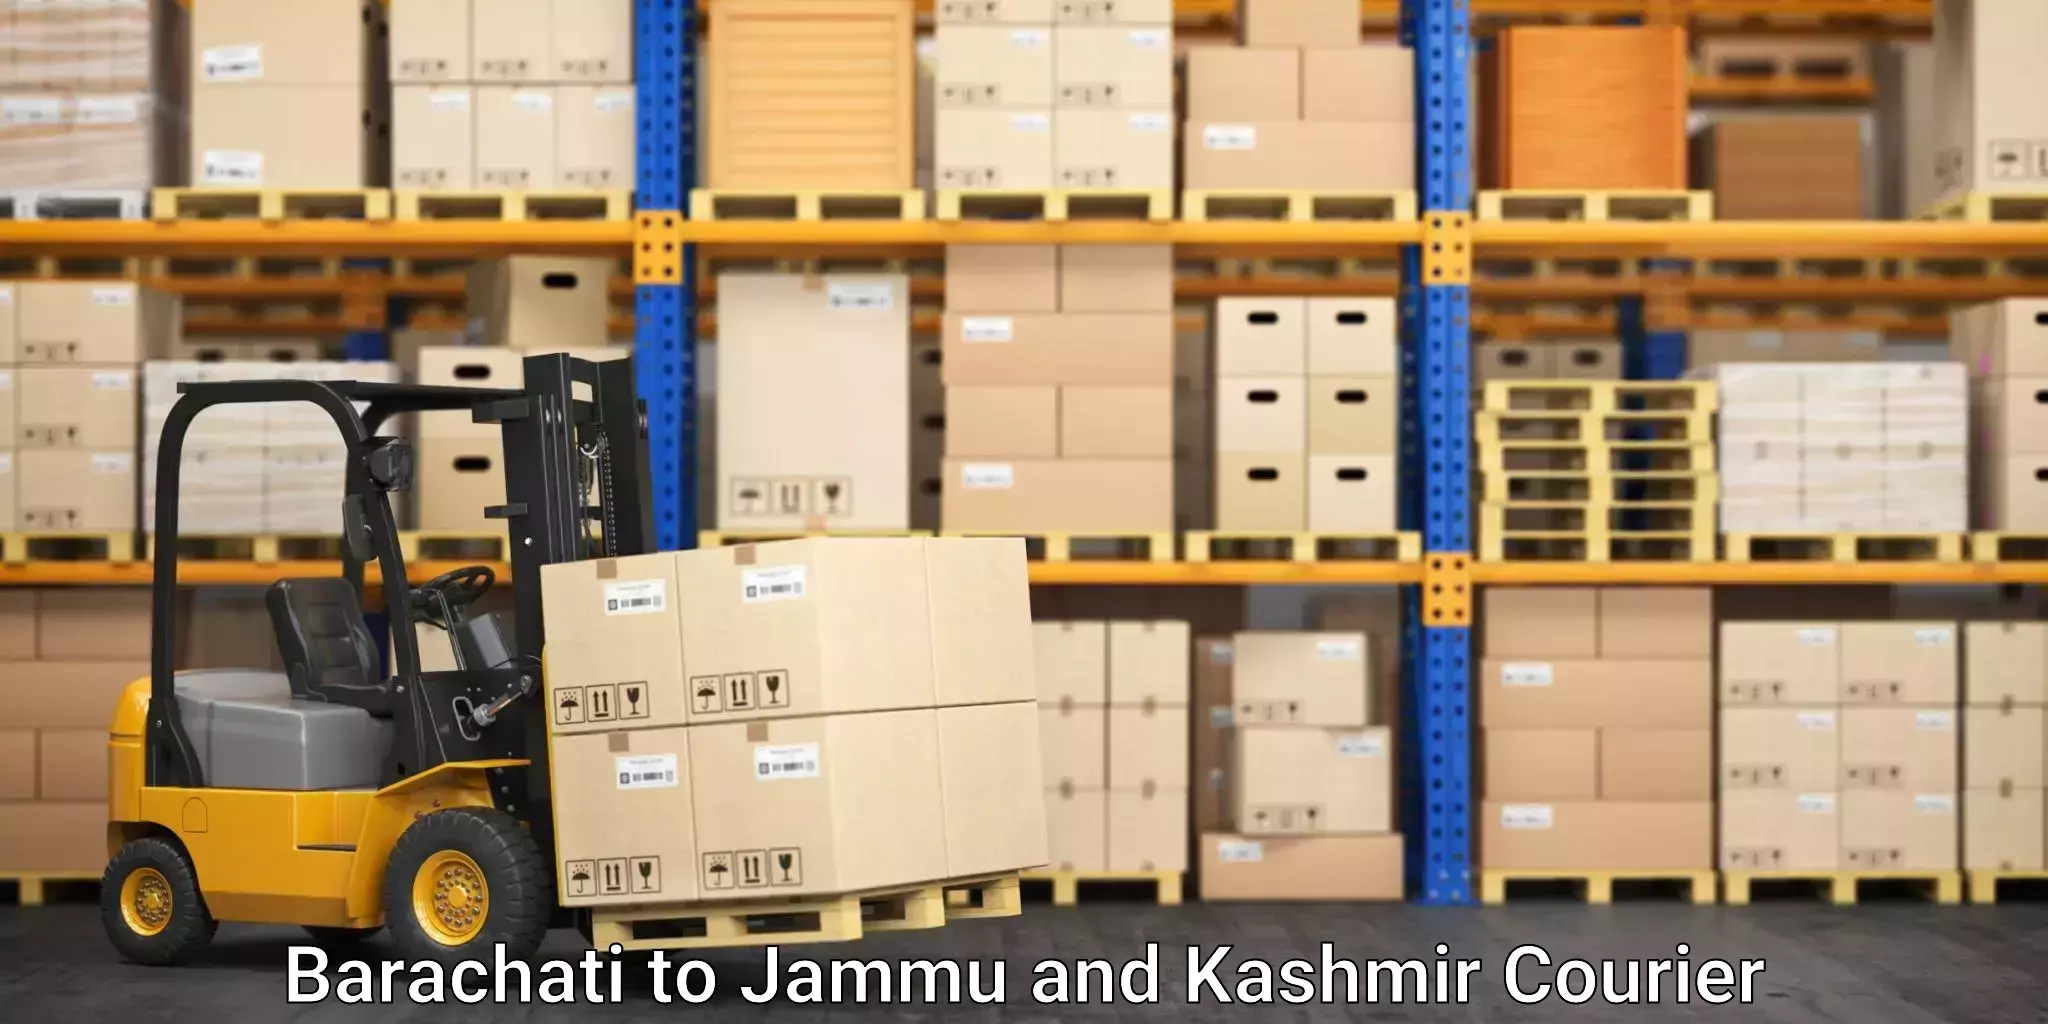 Moving and packing experts Barachati to Jammu and Kashmir